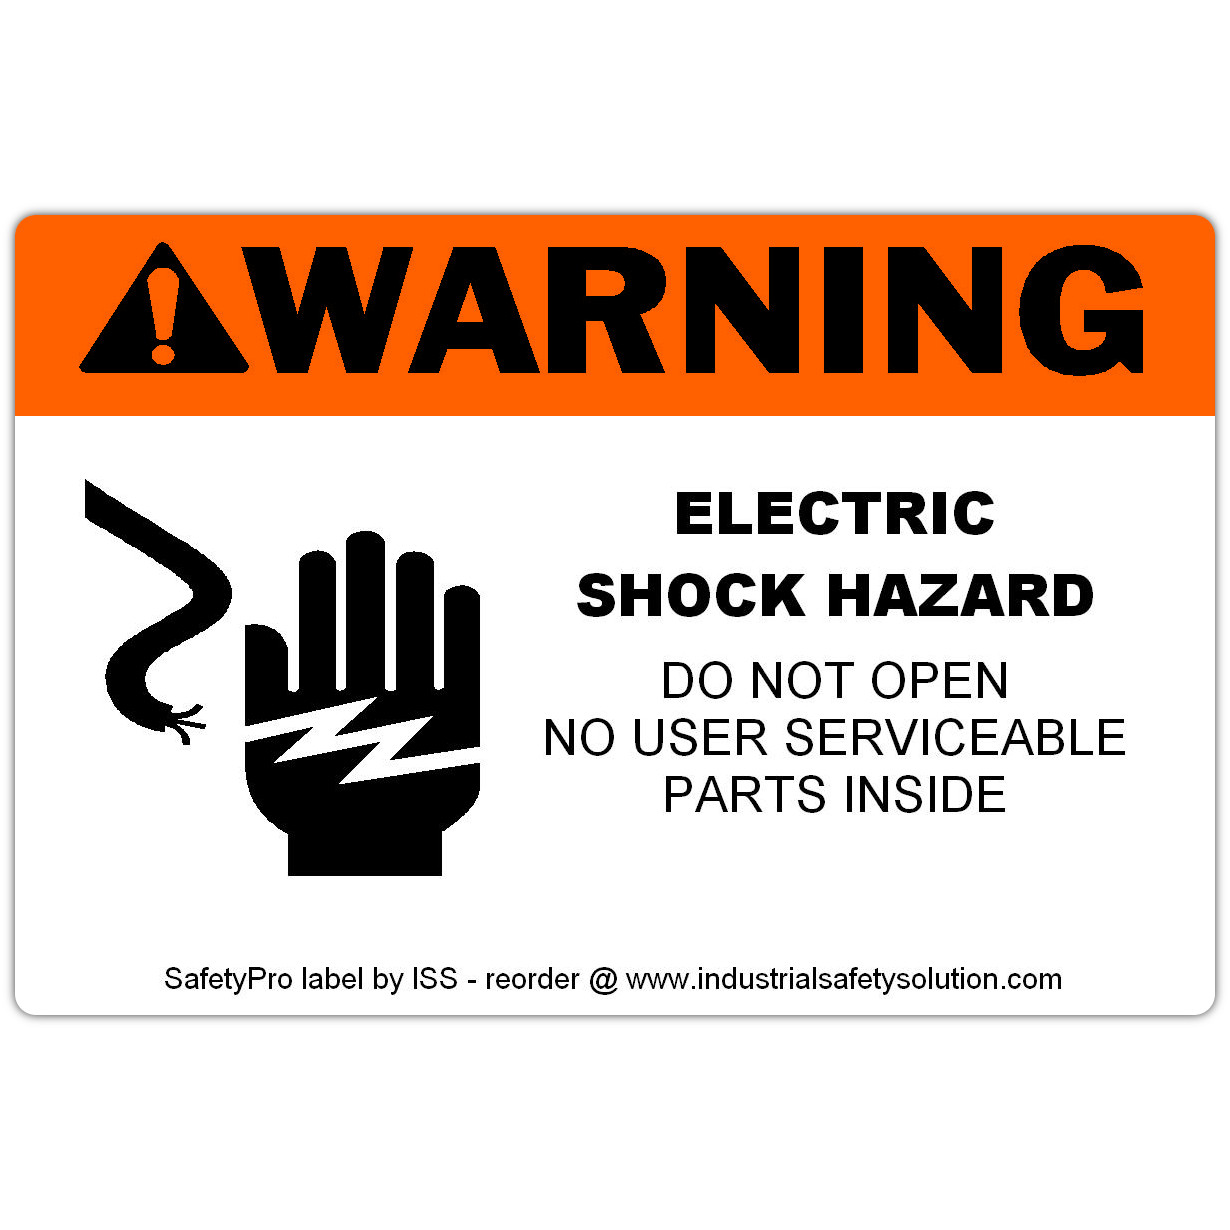 Ask a question about 4" x 6" WARNING Electric Shock Hazard Label